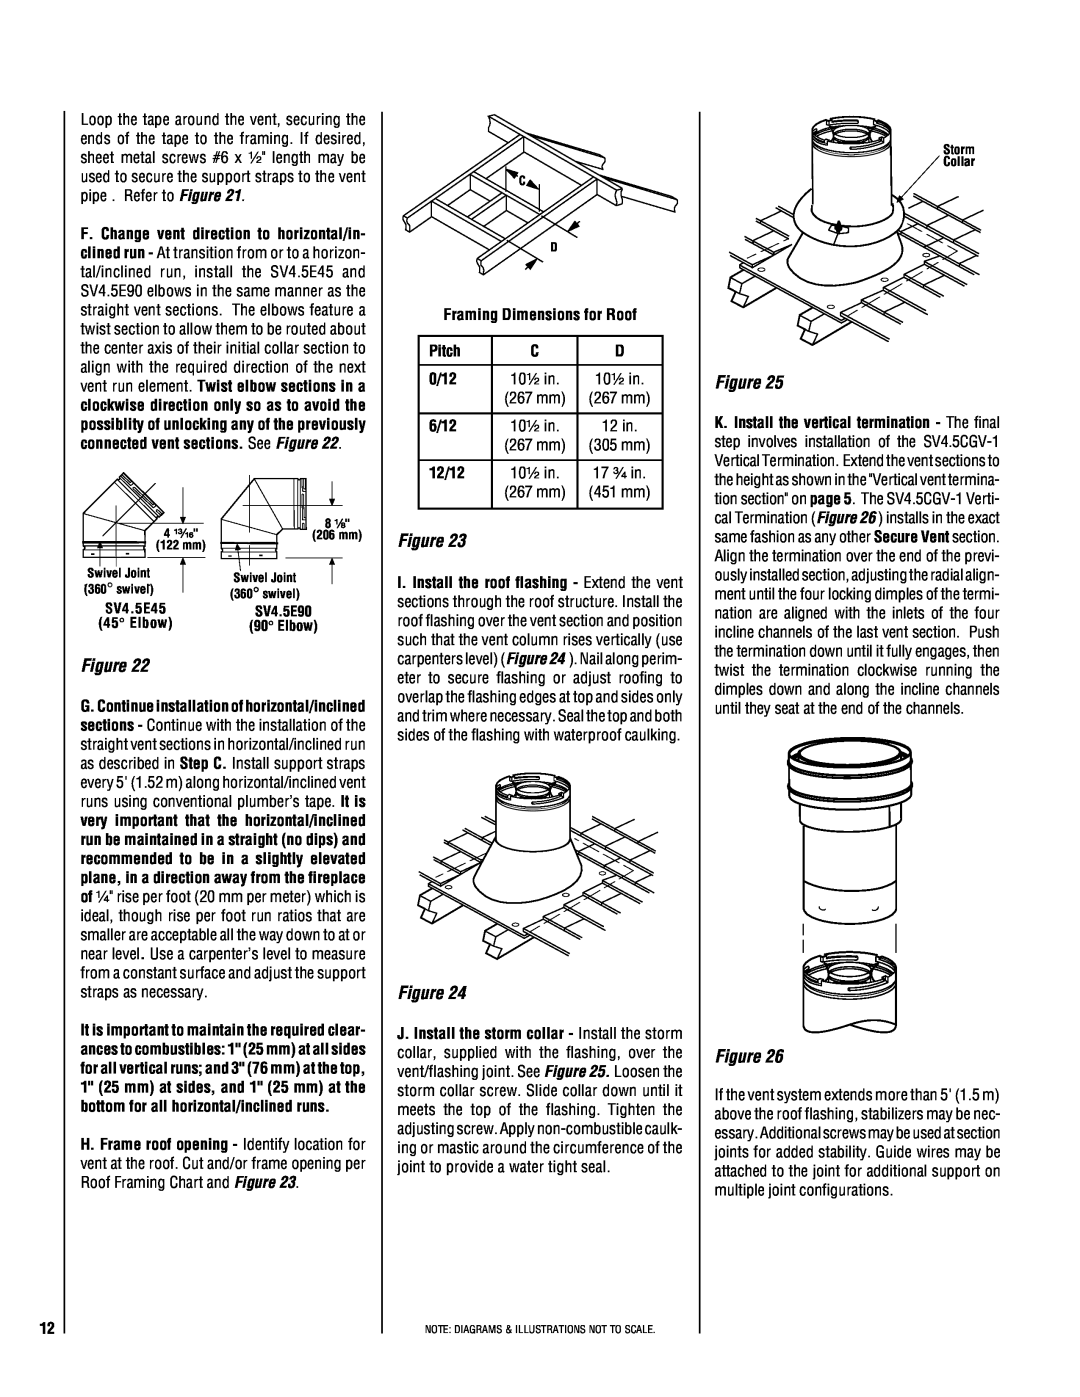 TOA Electronics 600 installation instructions Framing Dimensions for Roof, Pitch, 0/12, 6/12, 12/12 